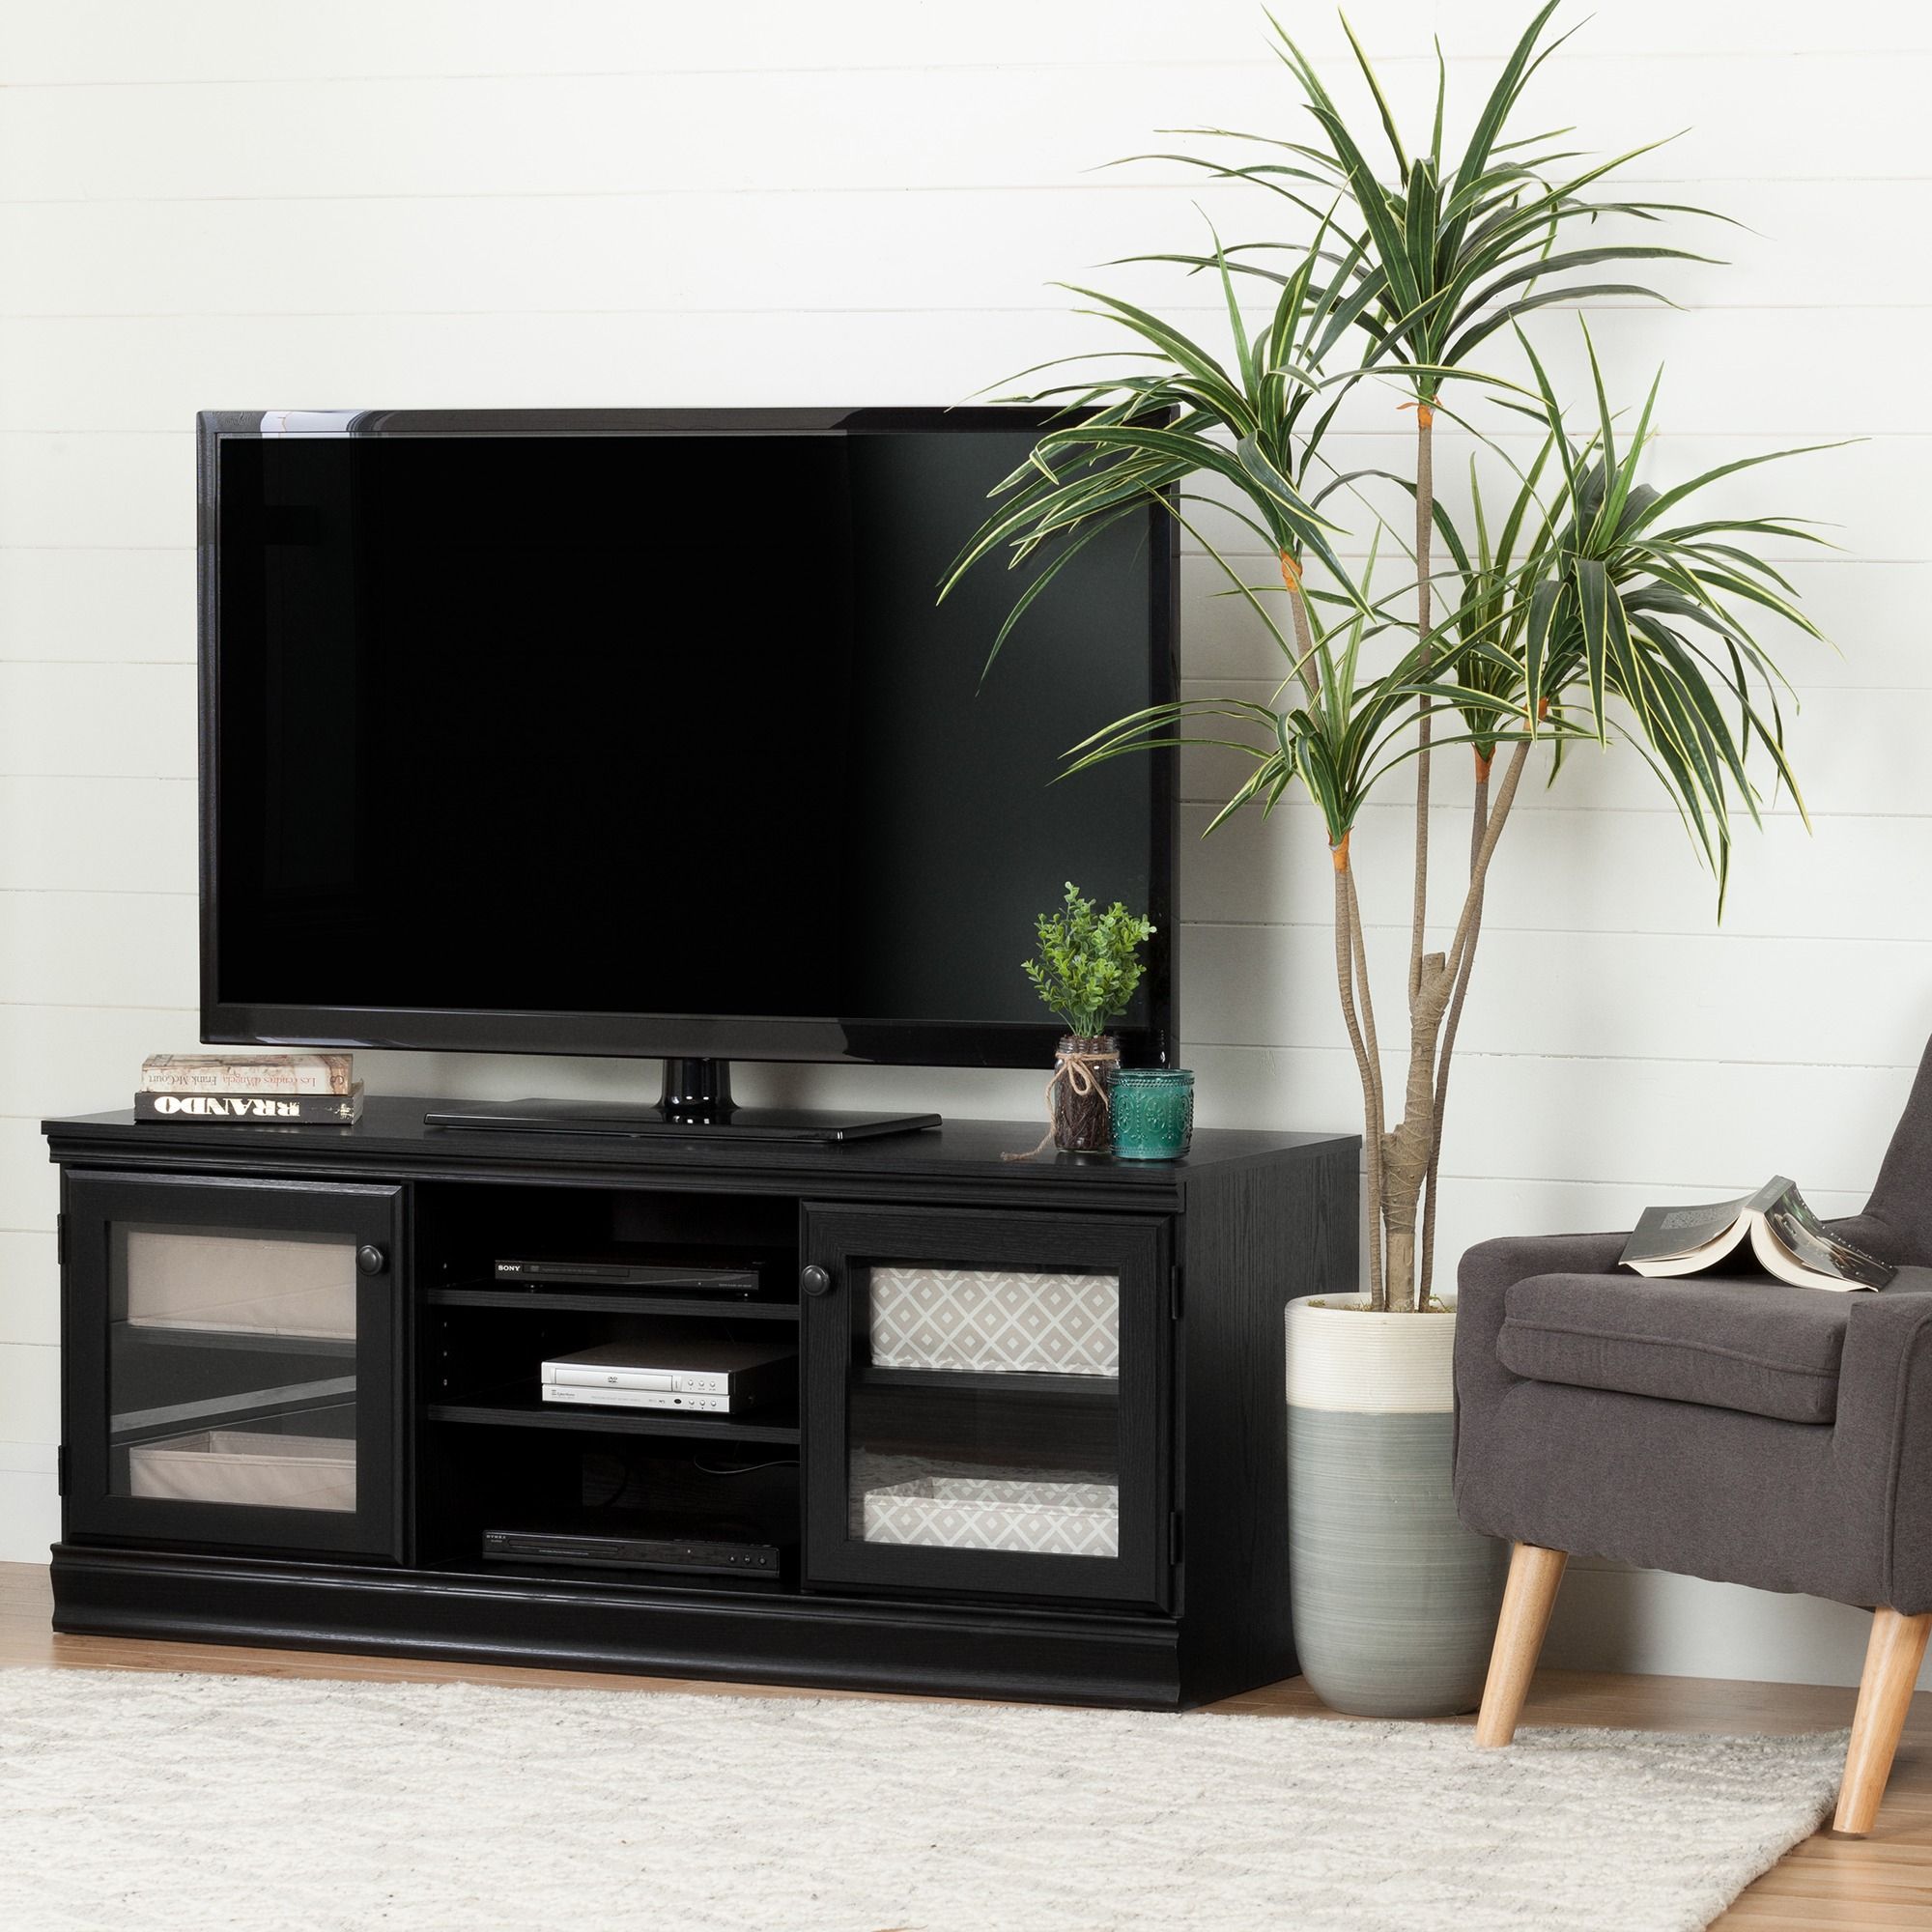 South Shore Morgan Tv Stand For Tvs Up To 75'', Multiple Within Tv Stands With Led Lights In Multiple Finishes (View 6 of 15)